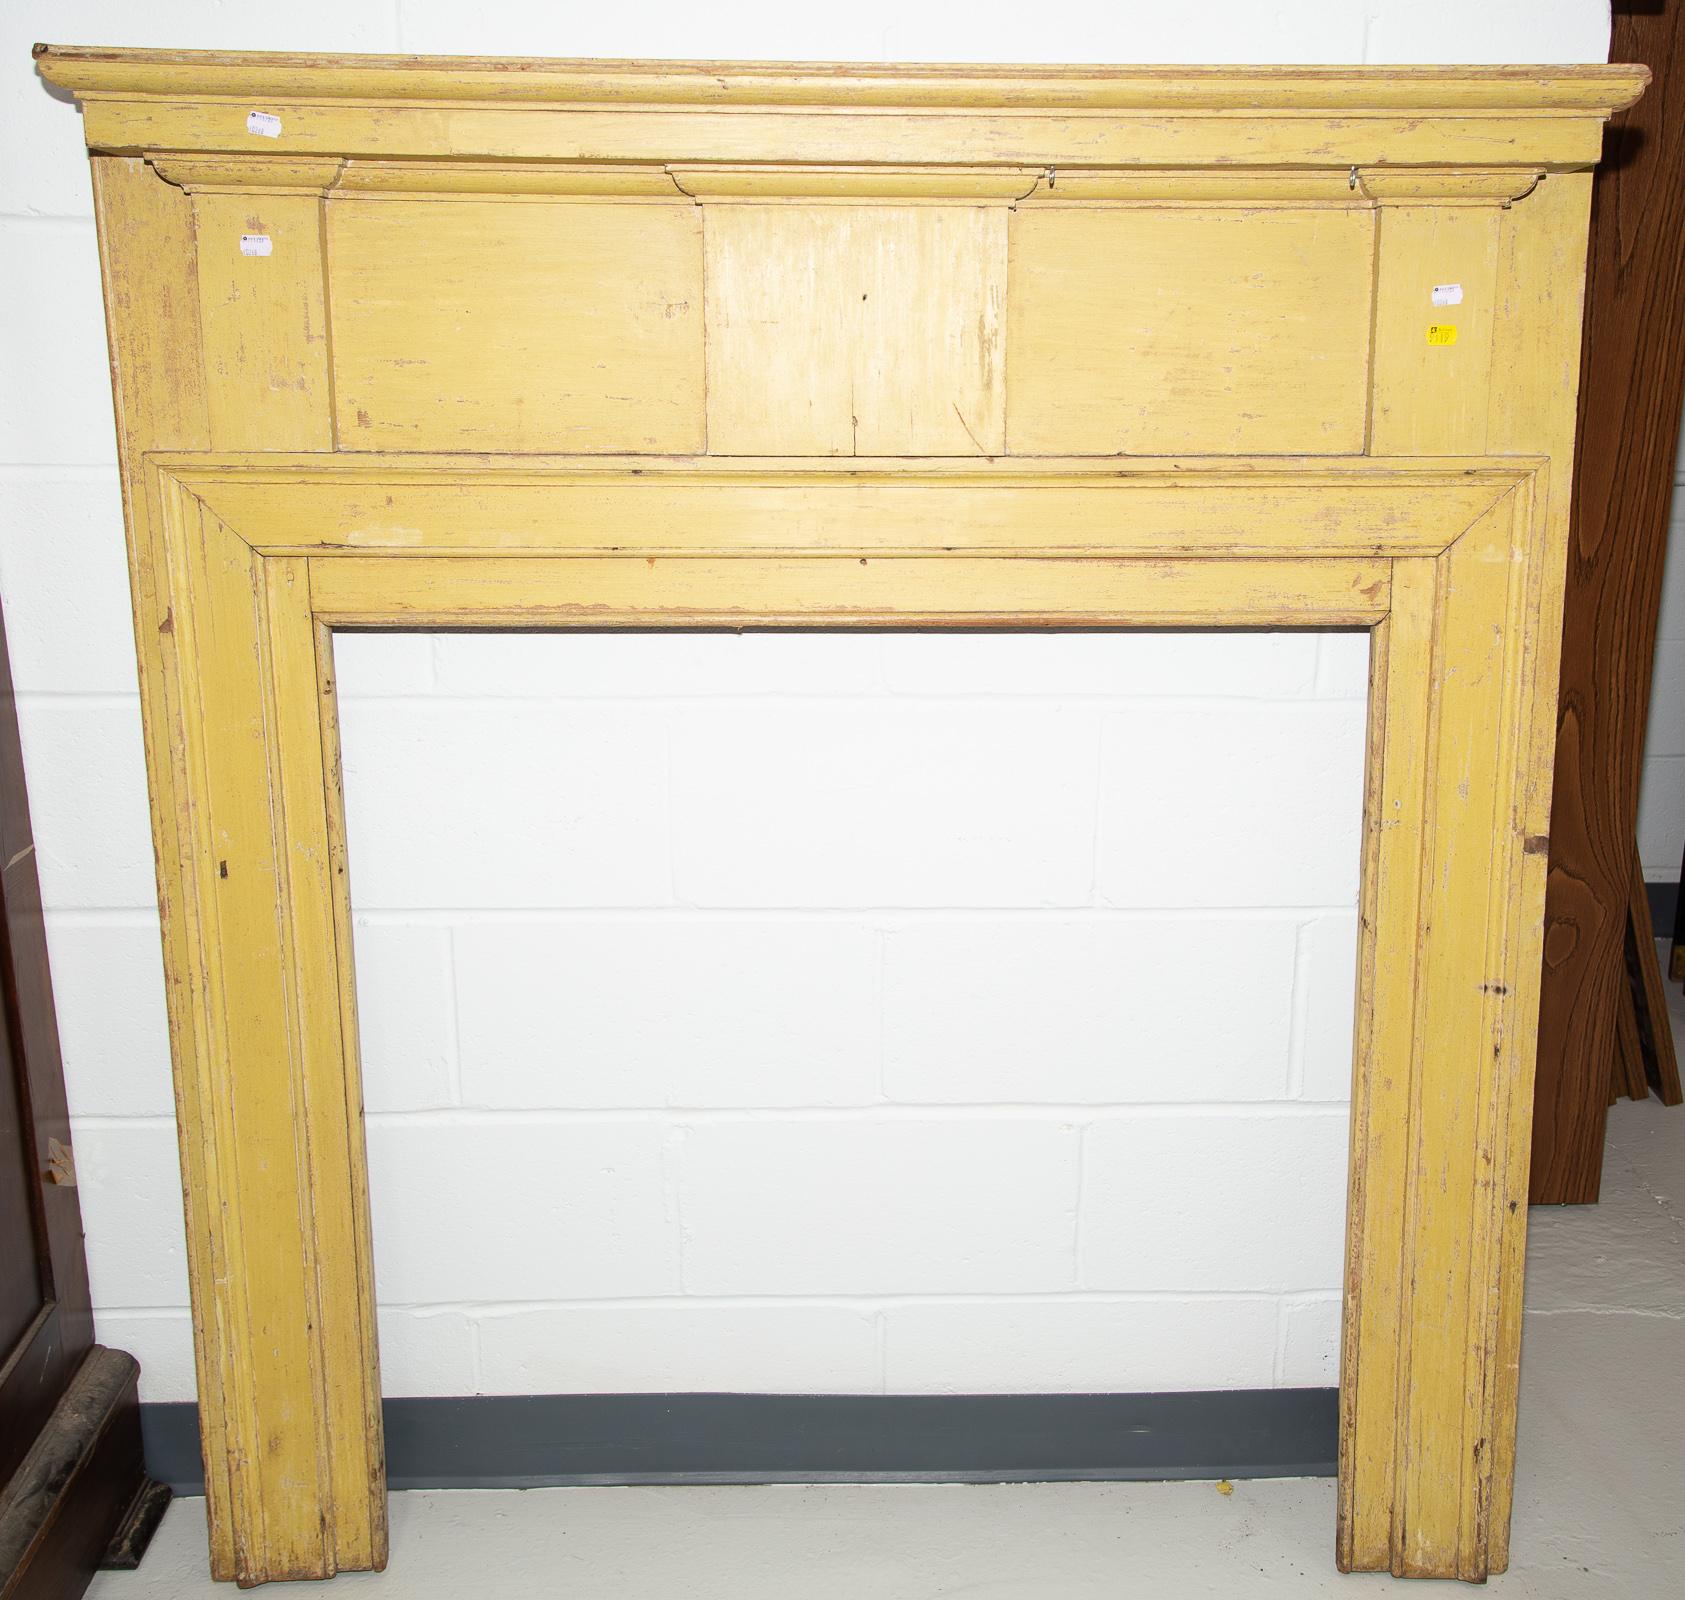 FEDERAL PAINTED PINE FIREPLACE 288089